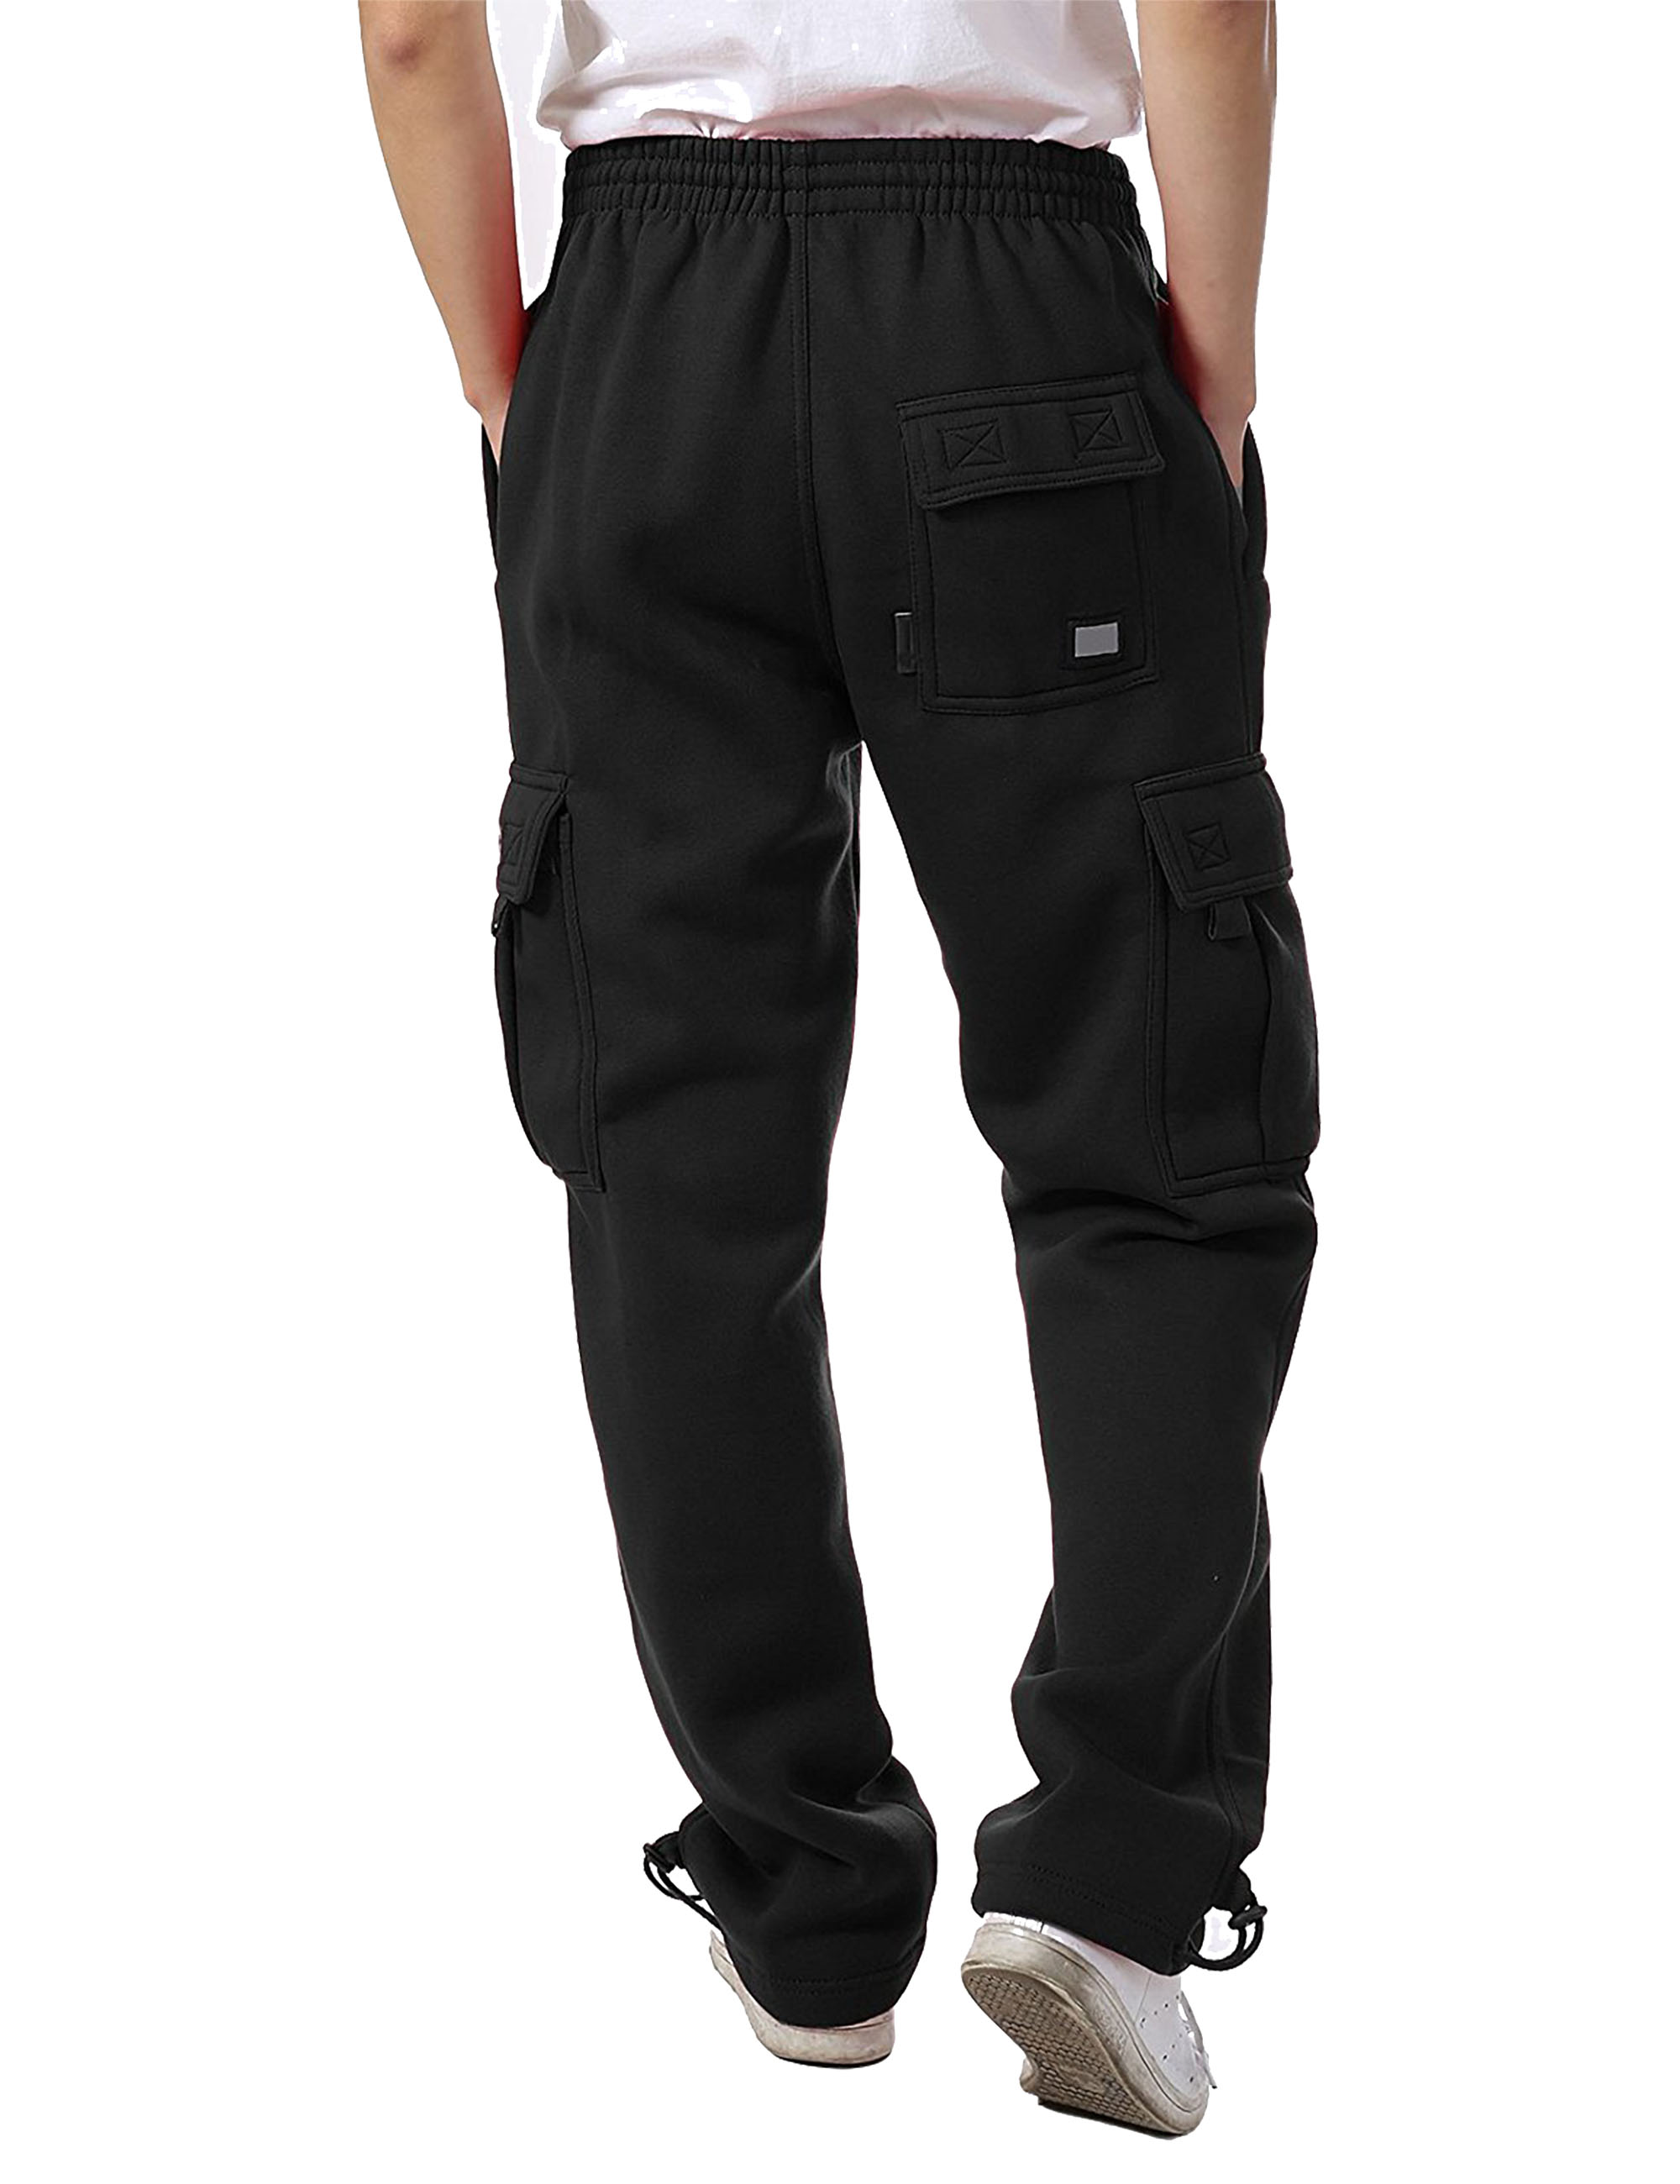 Hat and Beyond Mens Premium Heavyweight Cargo Sweatpants Big and Tall M-5XL